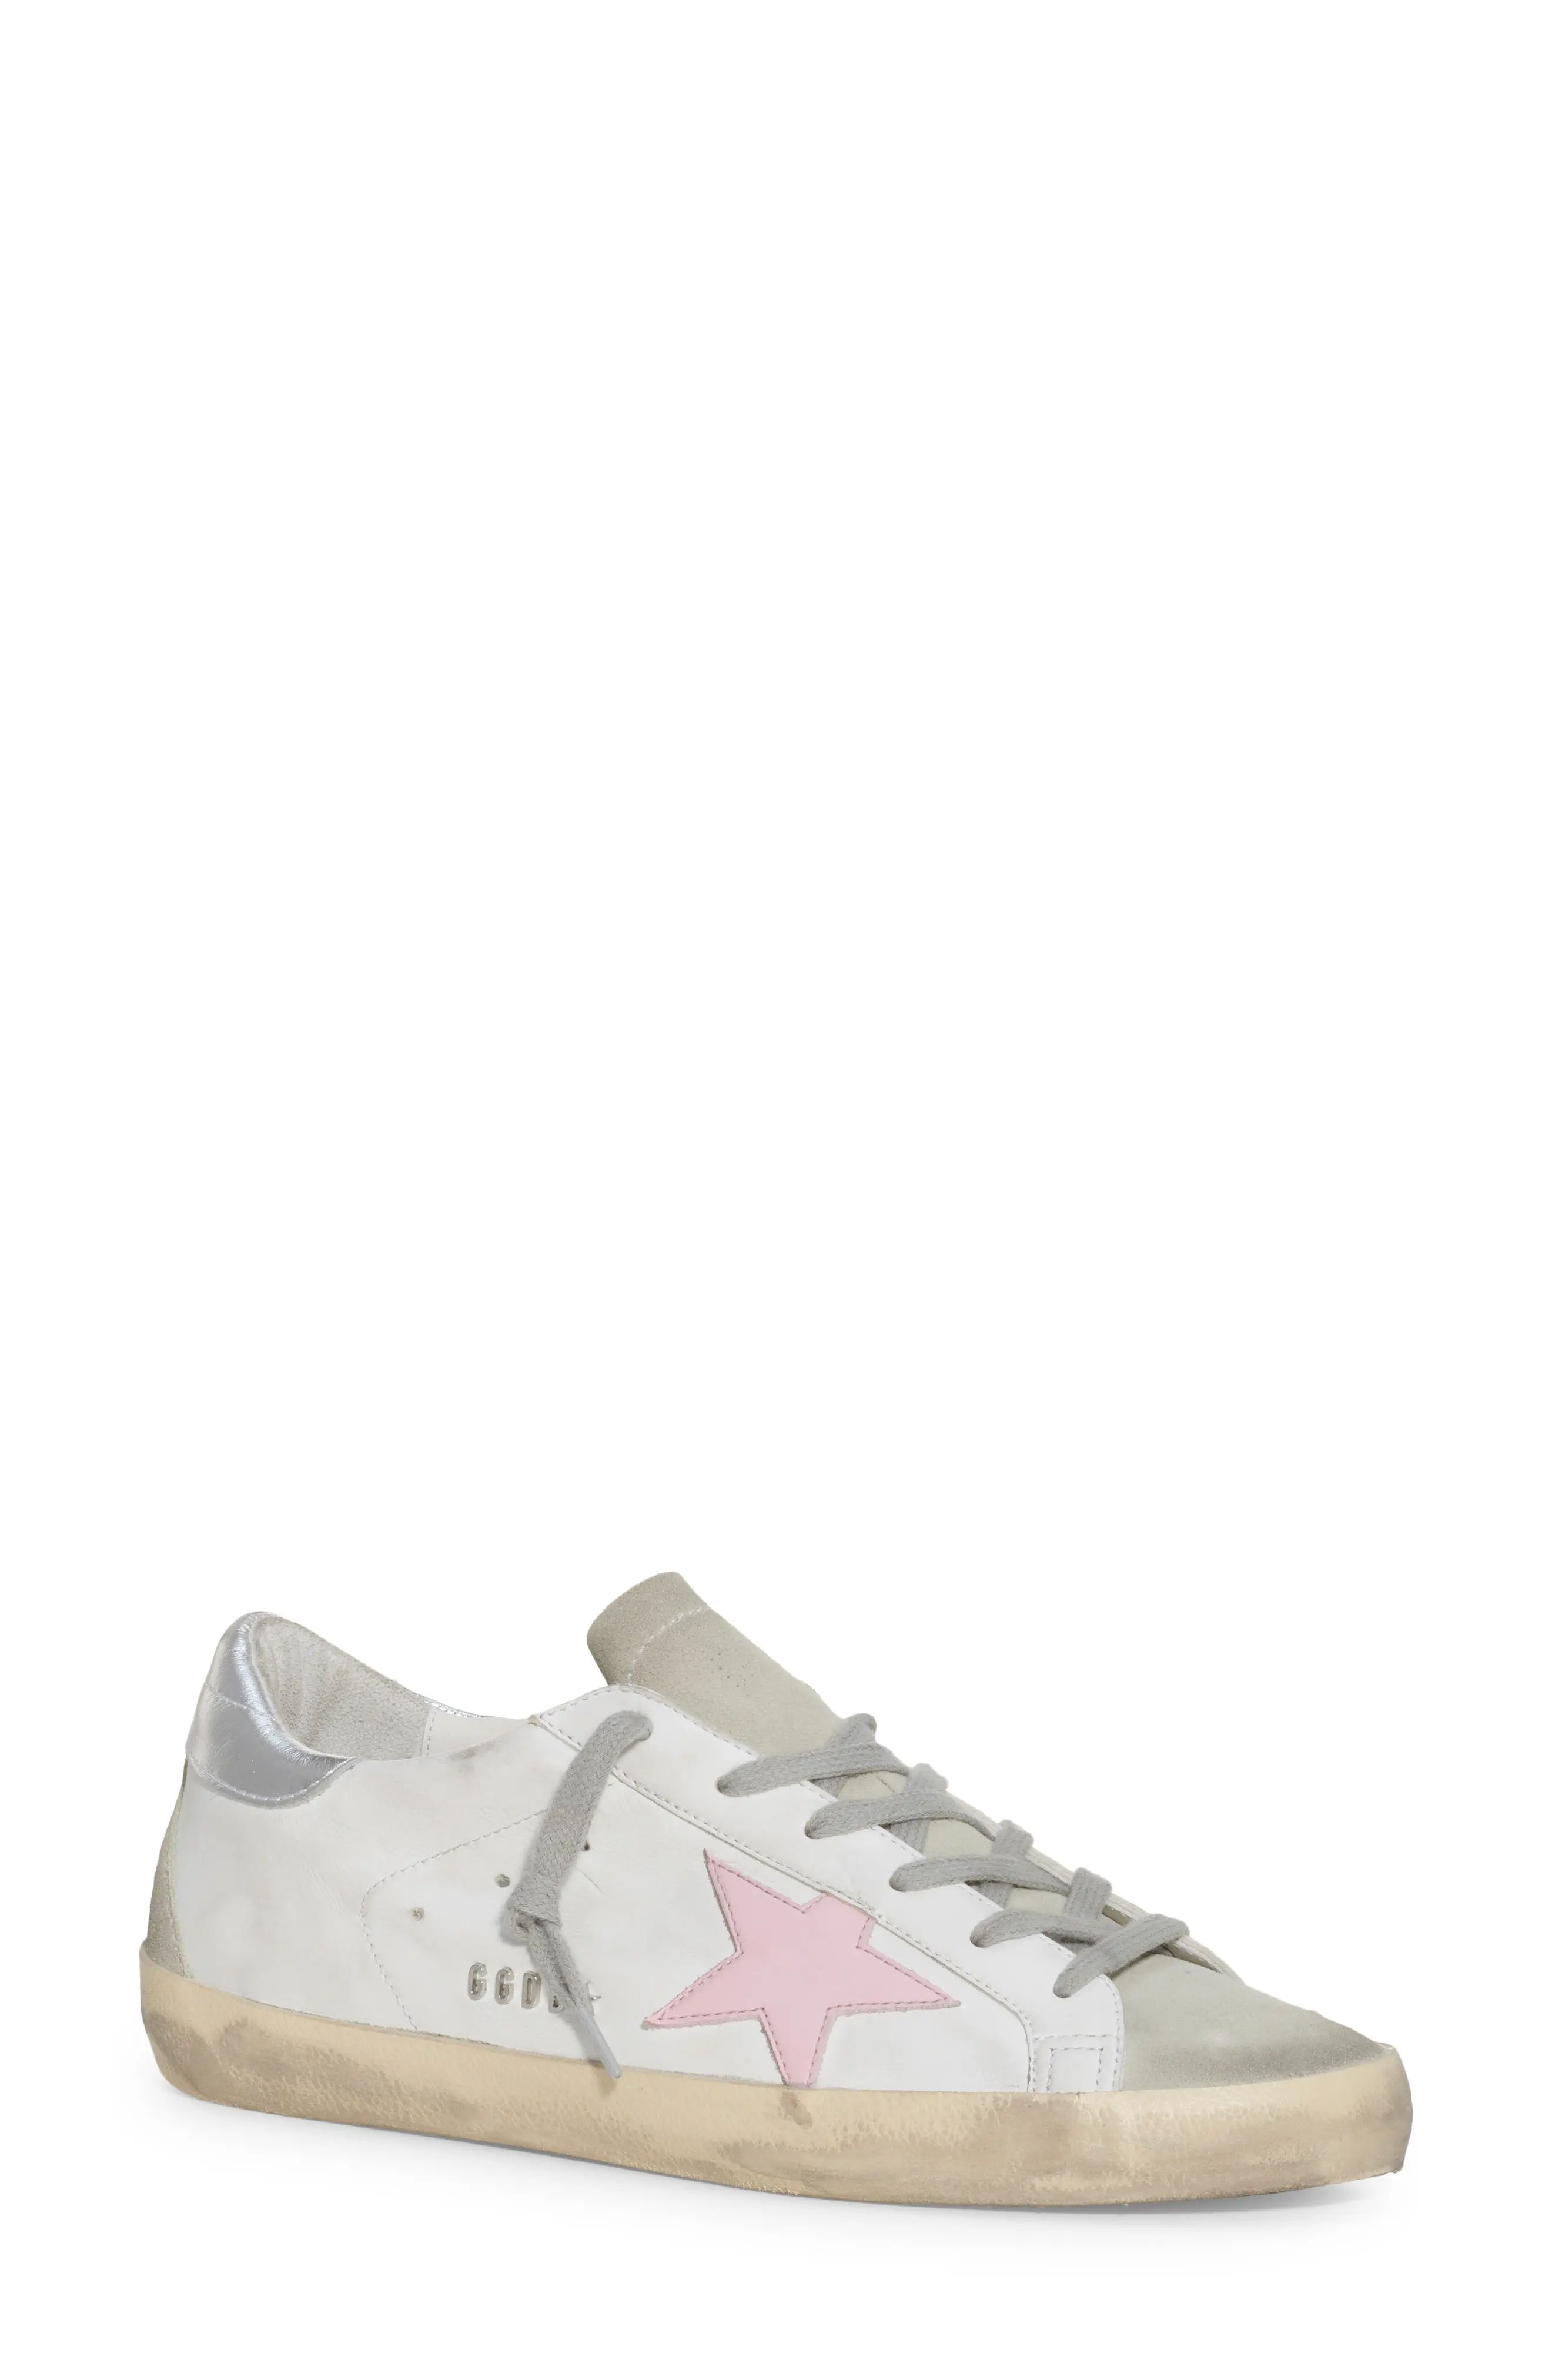 Golden Goose Super-Star Low Top Sneaker in White/Ice/Pink/Silver at Nordstrom, Size 11Us | Nordstrom